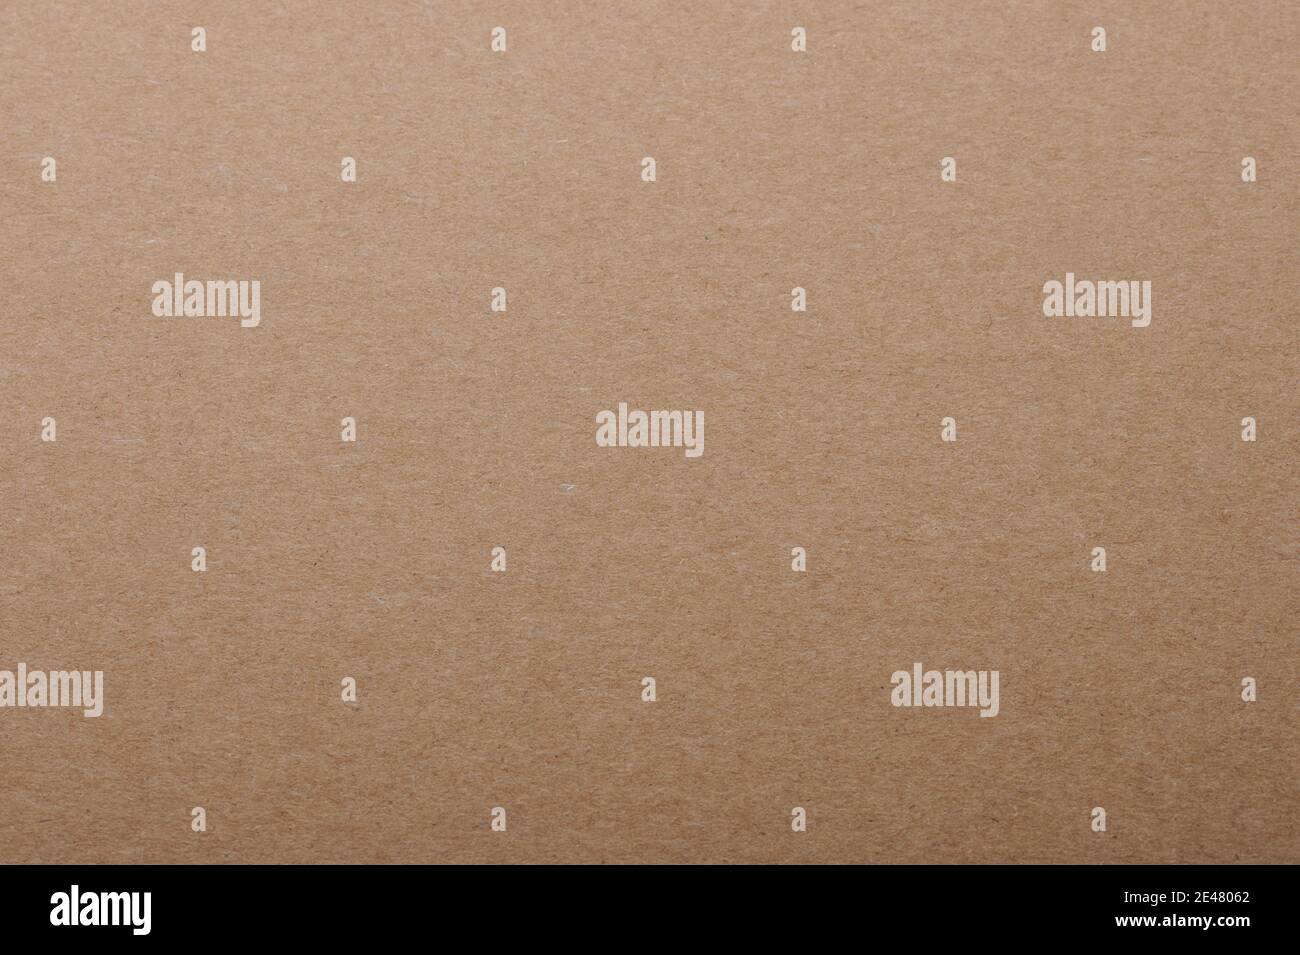 Light brown clean carton paper surface background Stock Photo